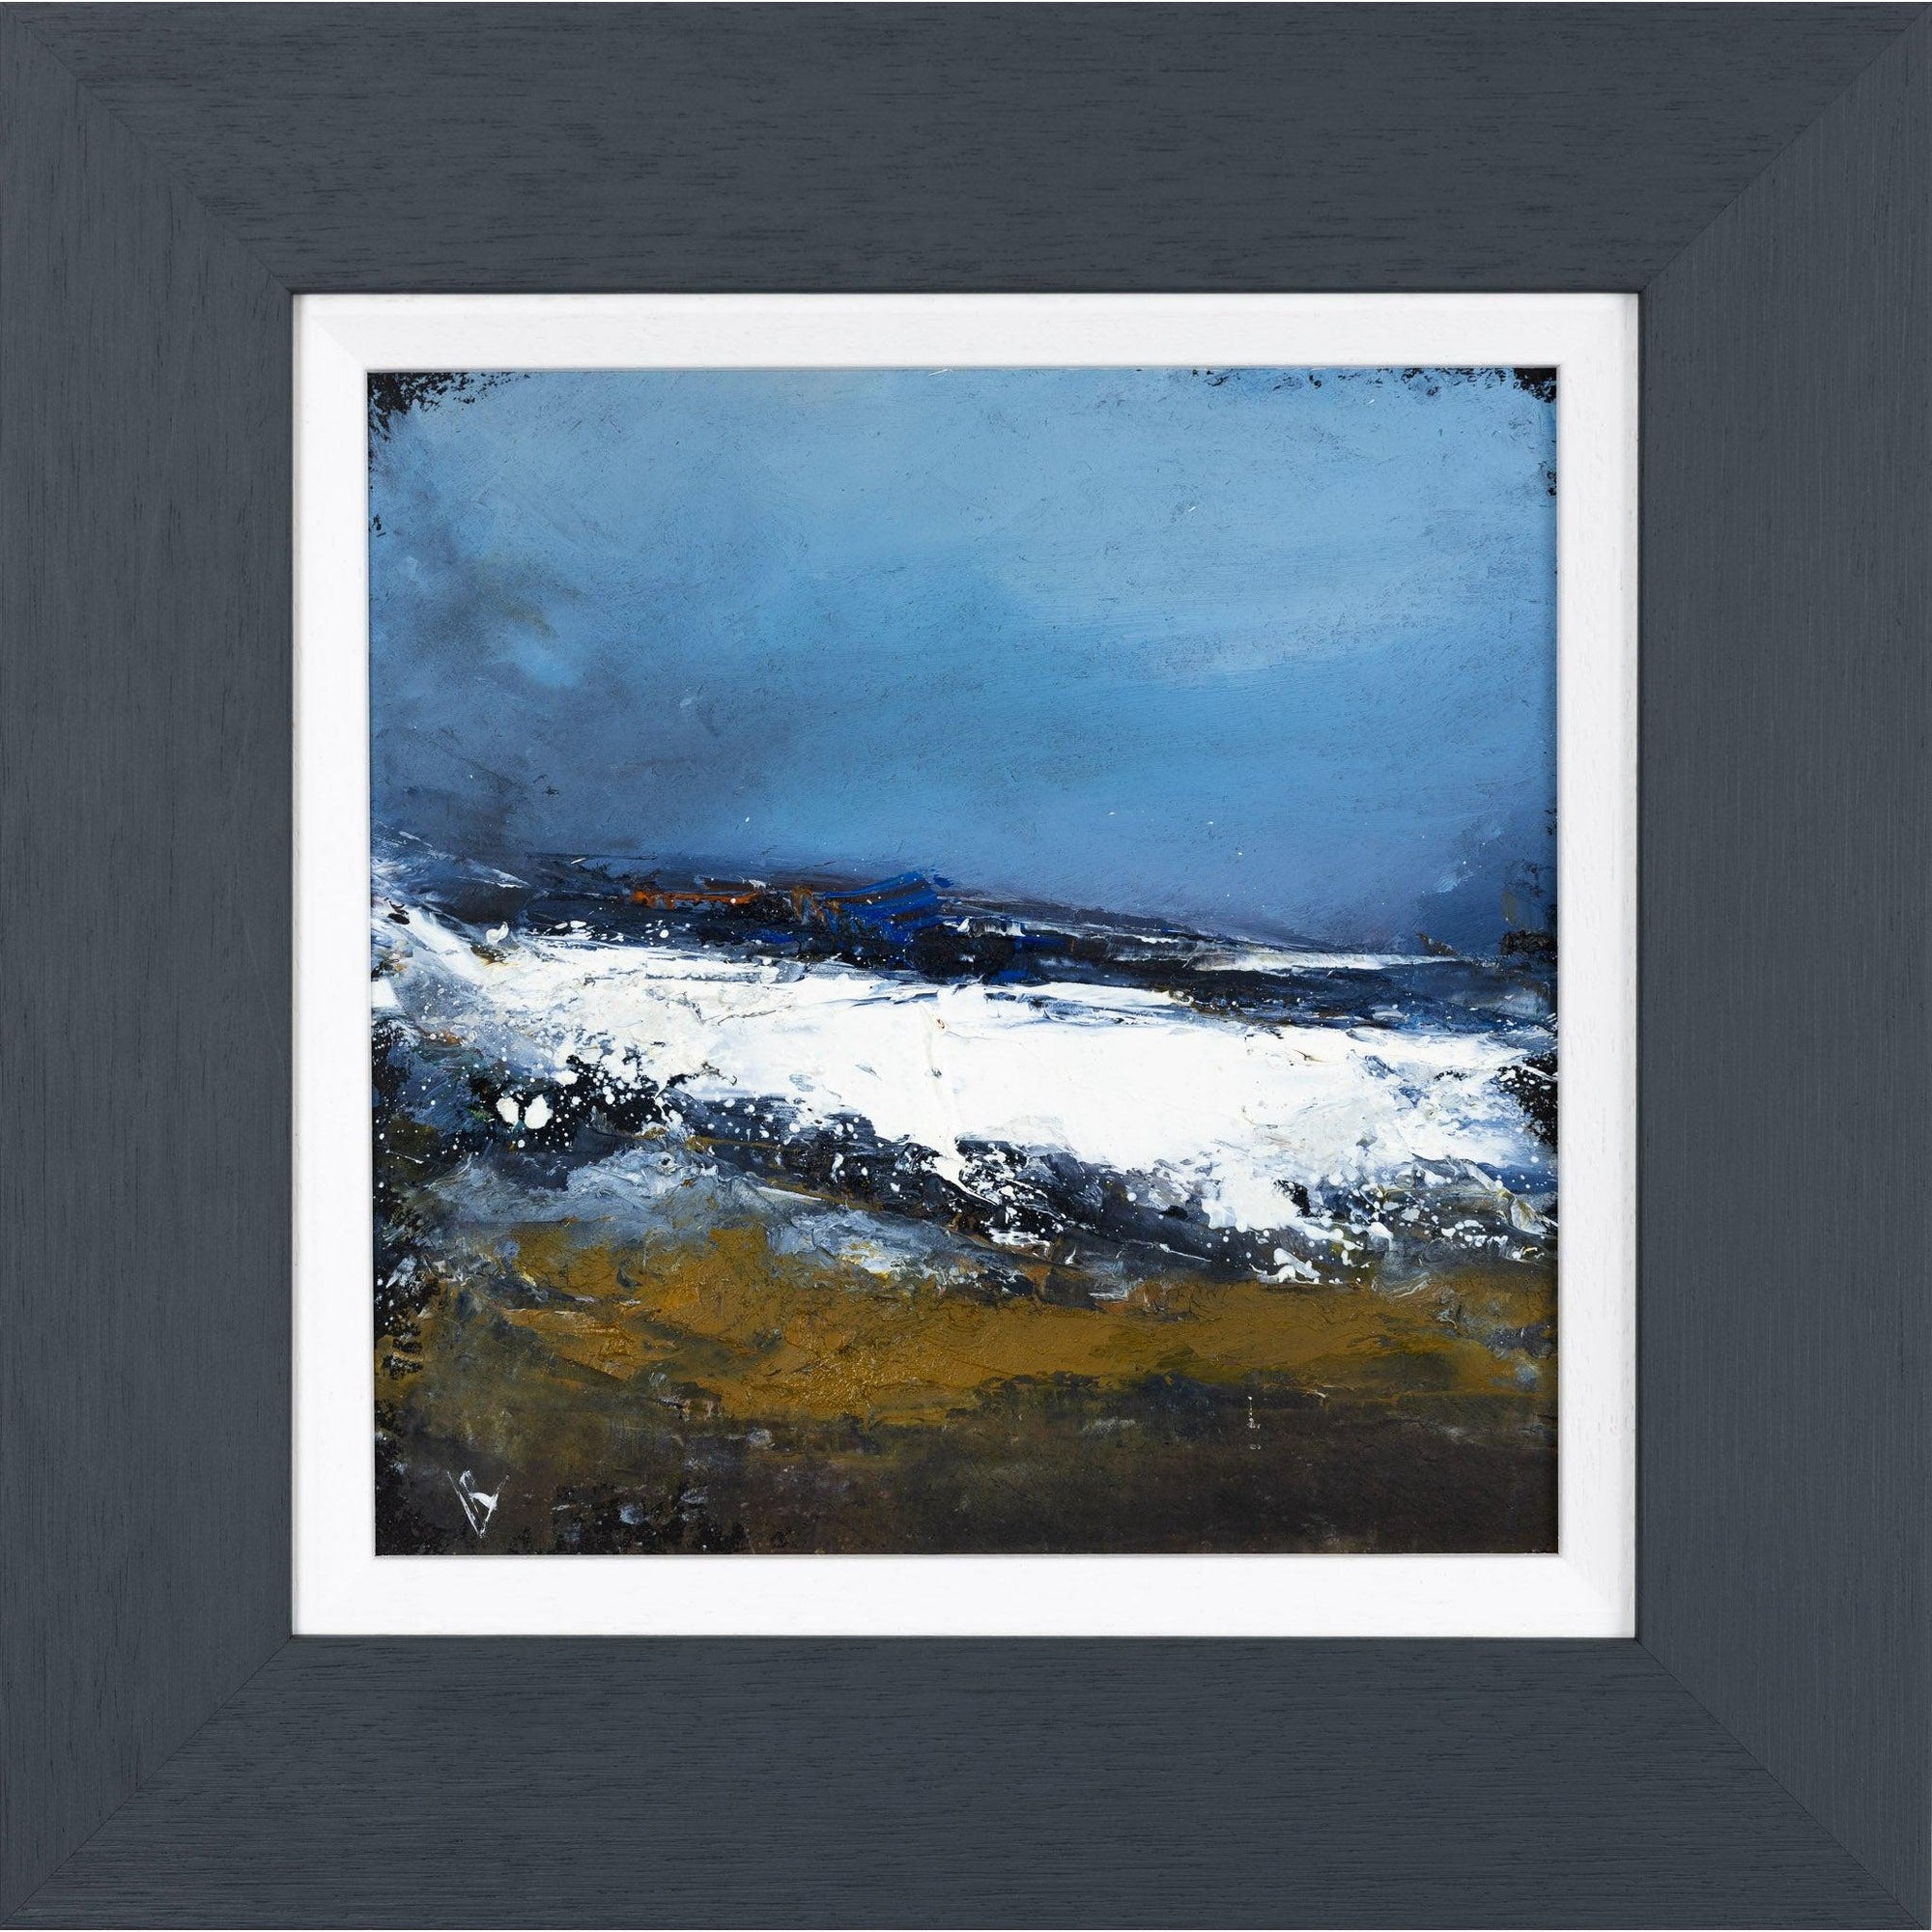 'Changing Tides' oil on board original by Ian Rawnsley, available at Padstow Gallery, Cornwall